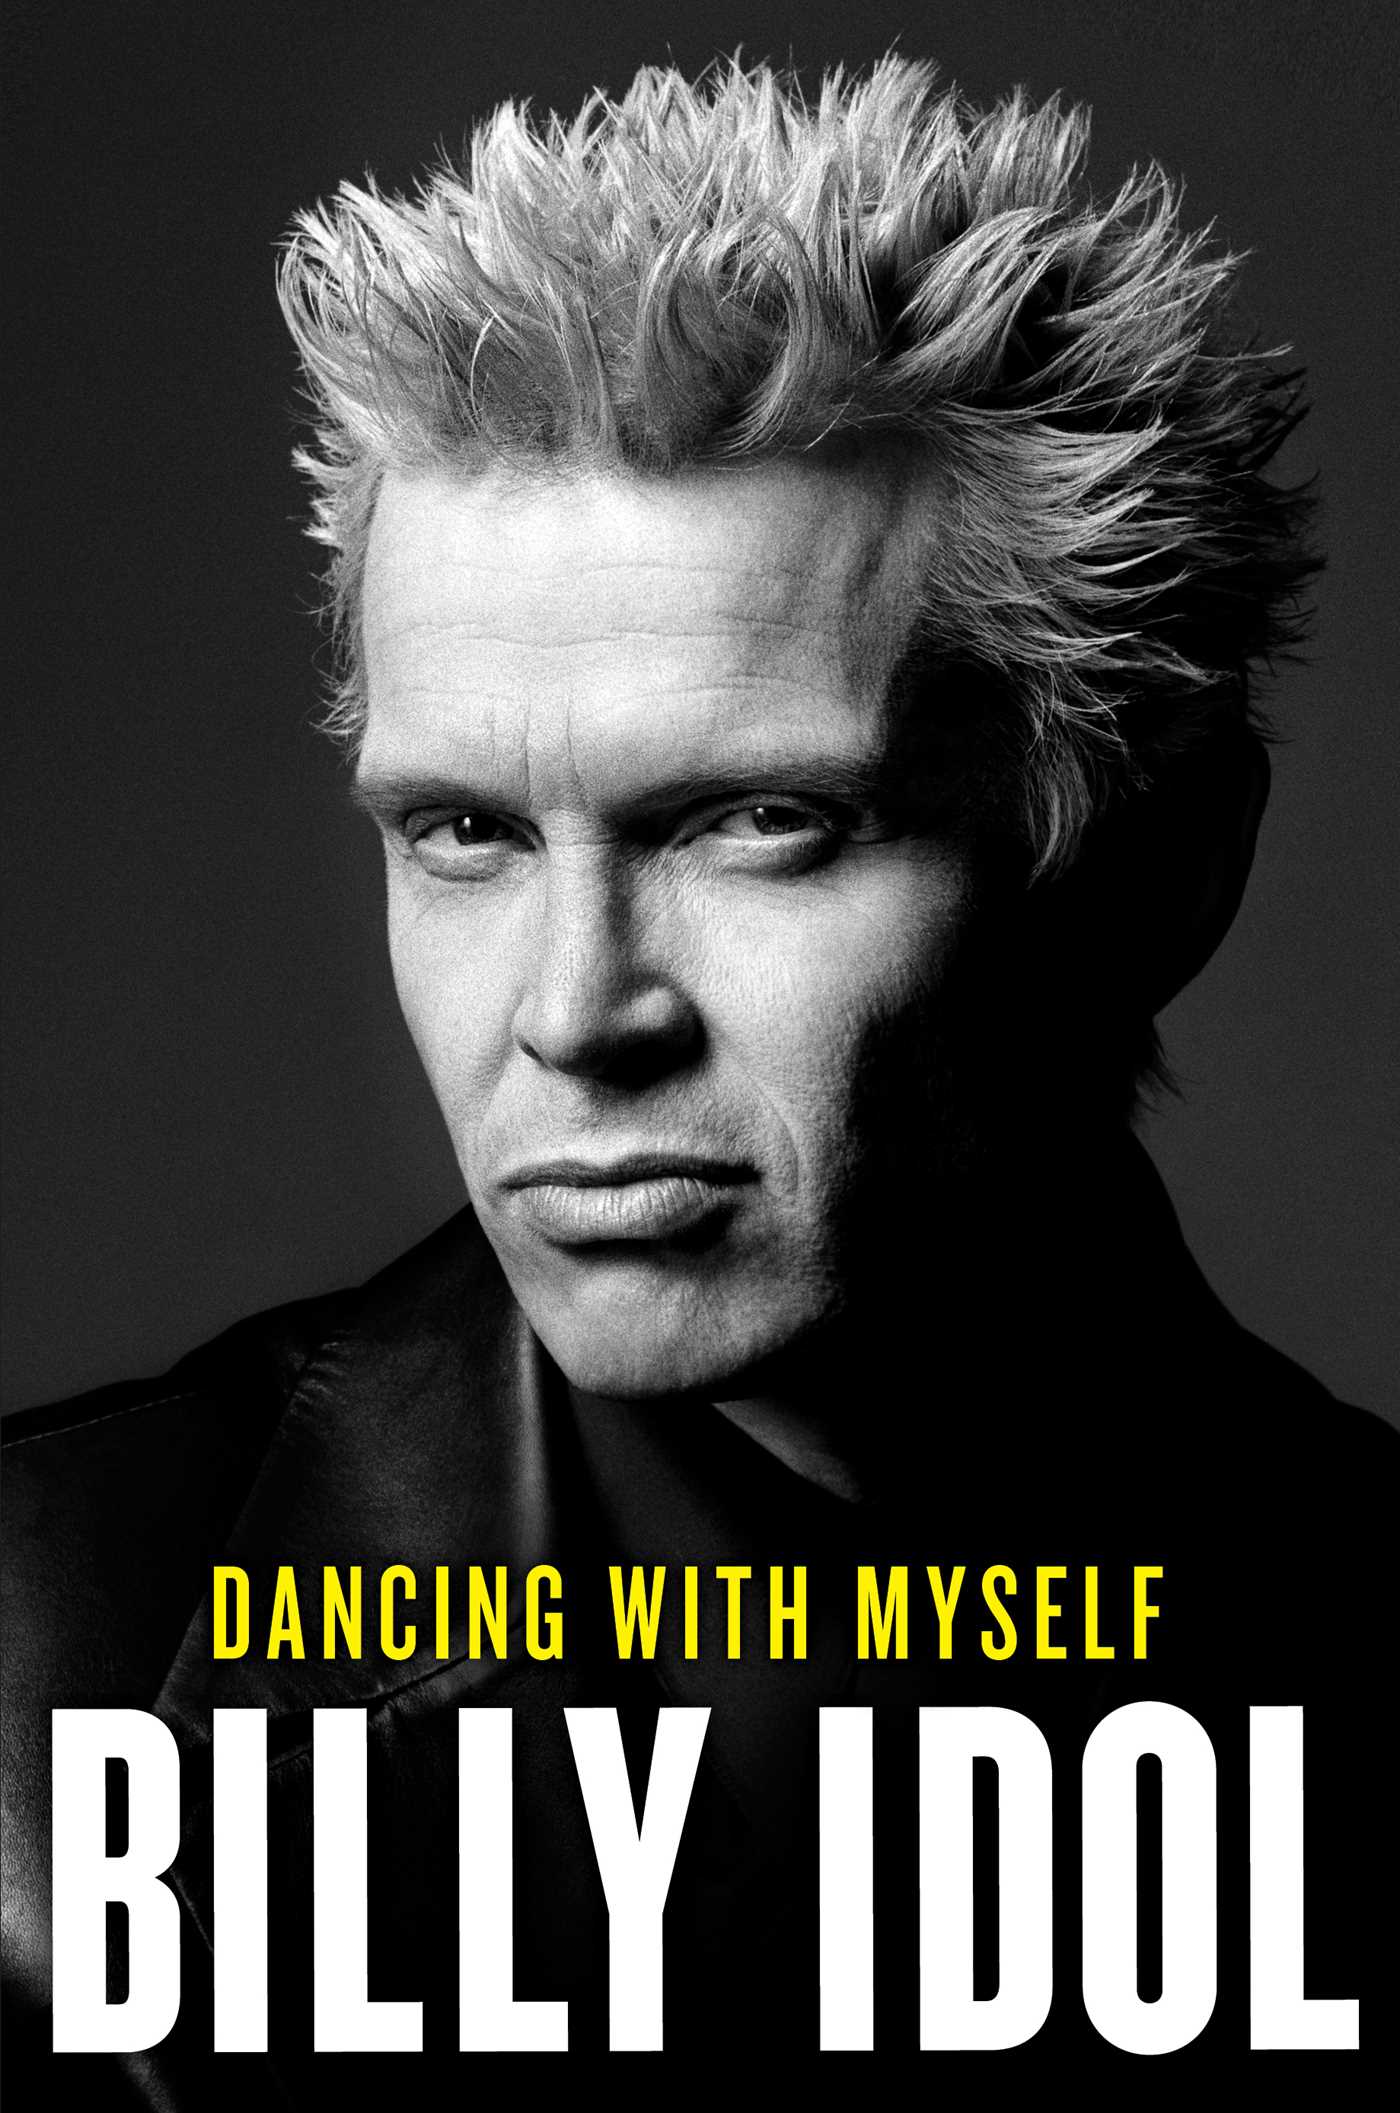 Billy Idol Sex, Drugs, Charmed Life, and the Crash That Nearly Killed Me Time pic